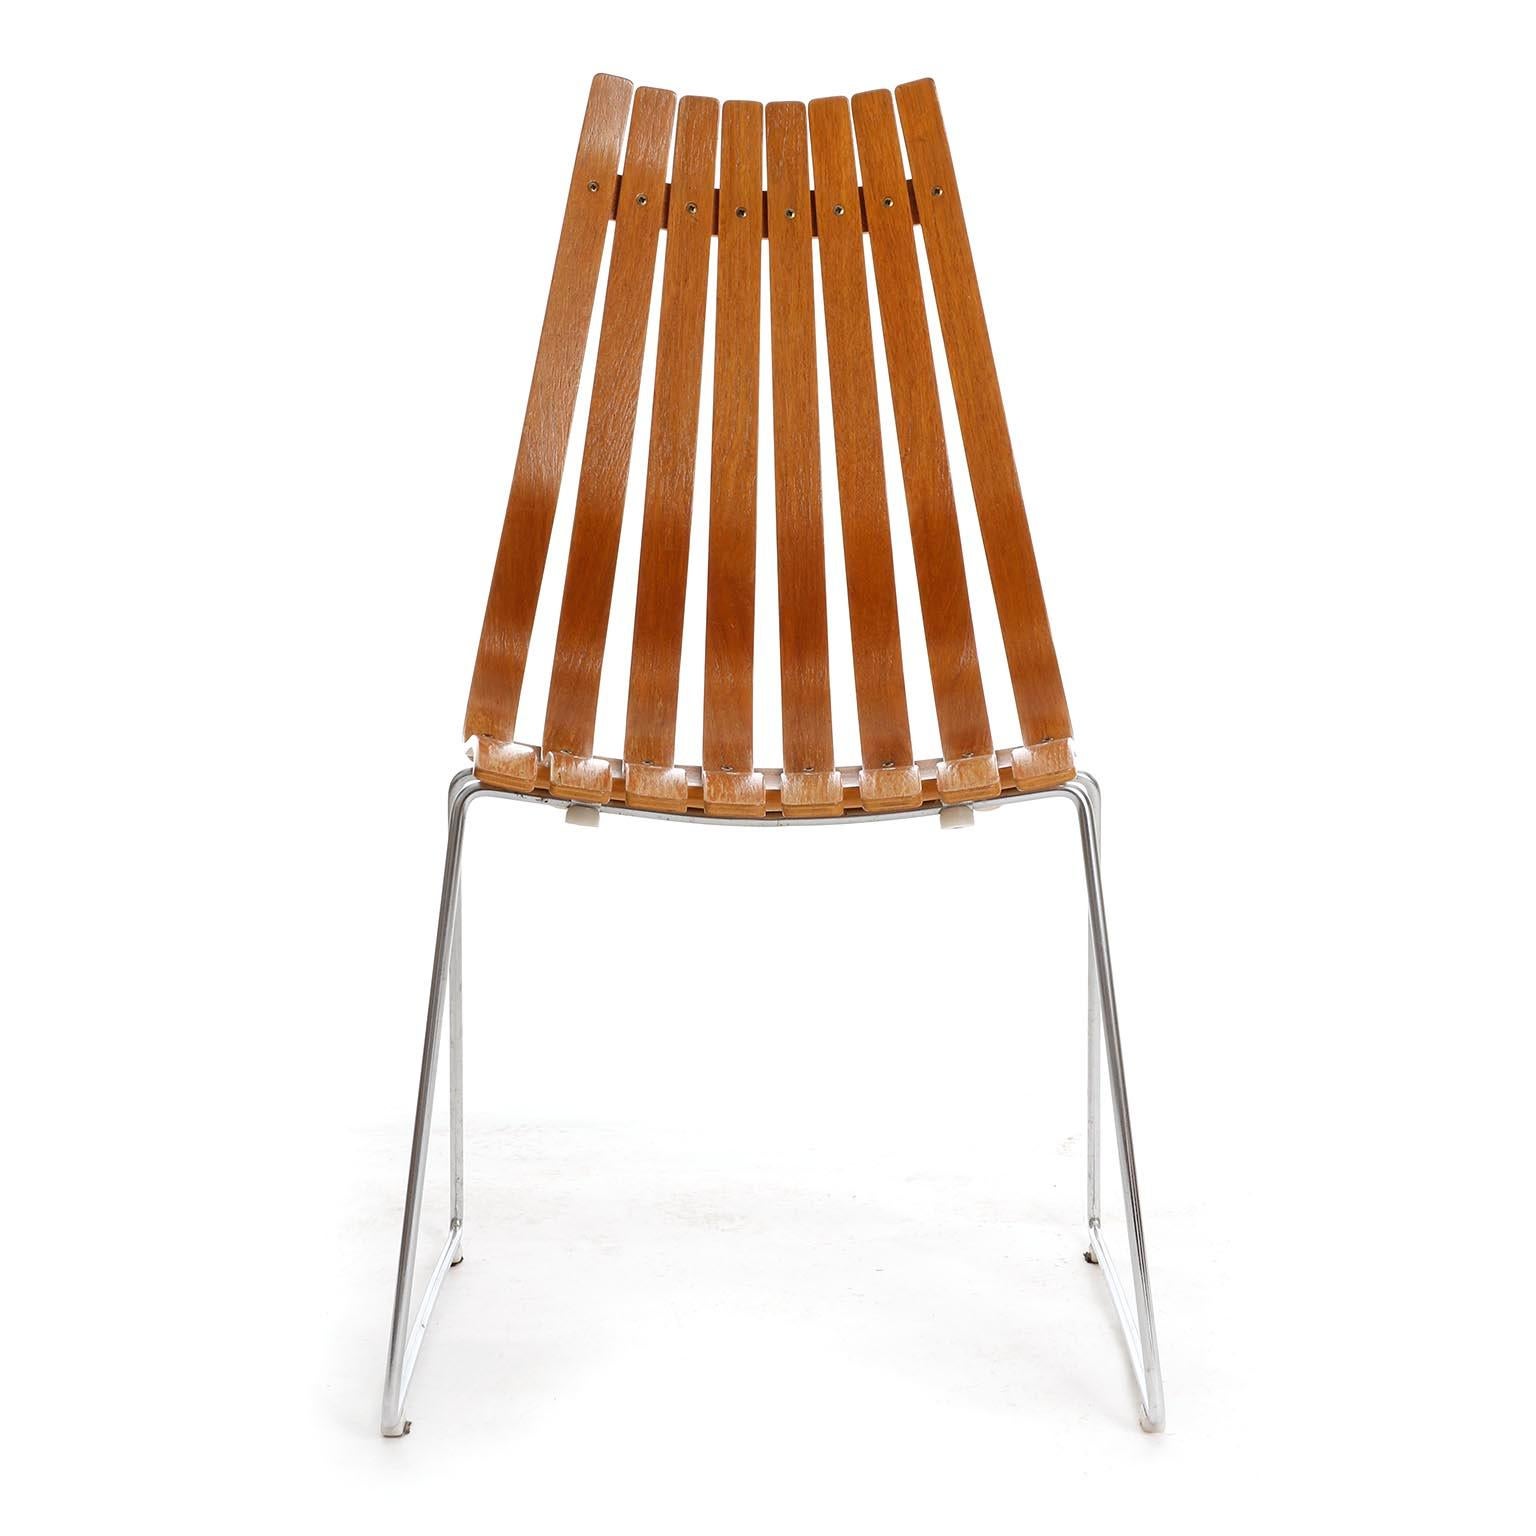 A chair from the Scandia series, designed by Norwegian designer Hans Brattrud in 1957 and produced by Hove Mobler in midcentury, circa 1960.
The chair is made of a chromed steel base and the seat consists of curved and bent slats of warm toned